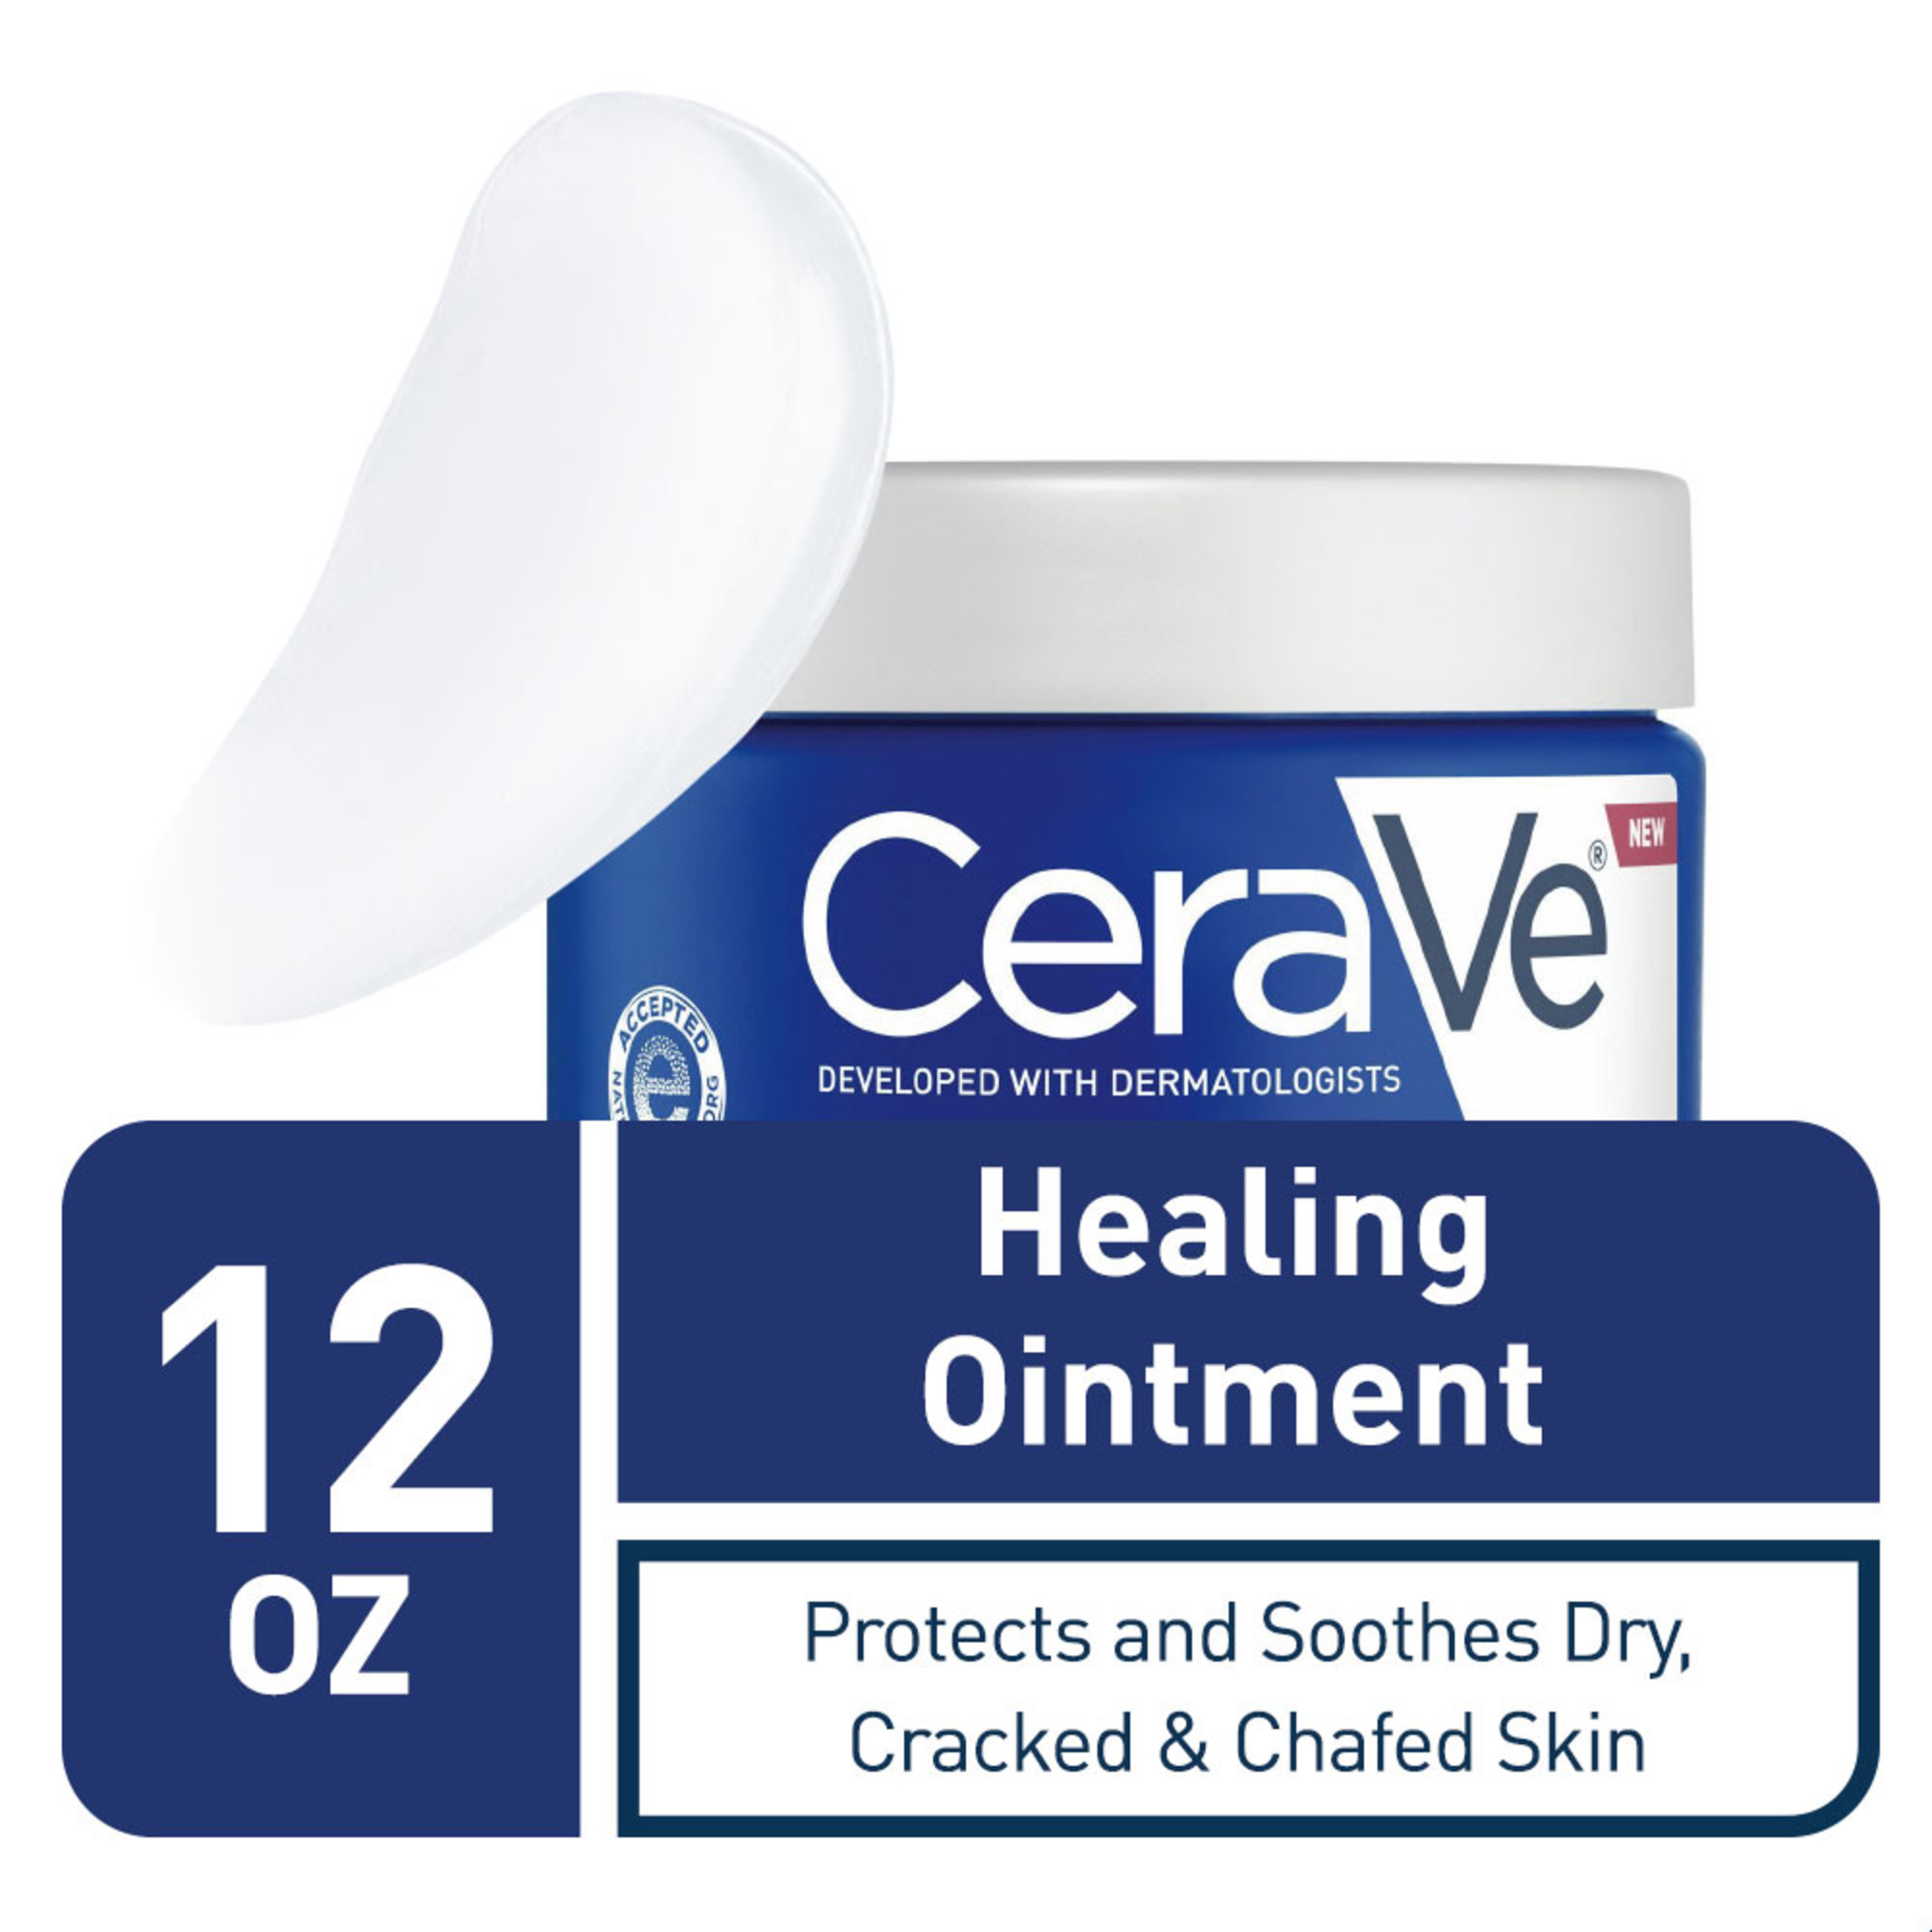 CeraVe Healing Ointment, Protects and Soothes Cracked Skin,12 oz. - image 1 of 12